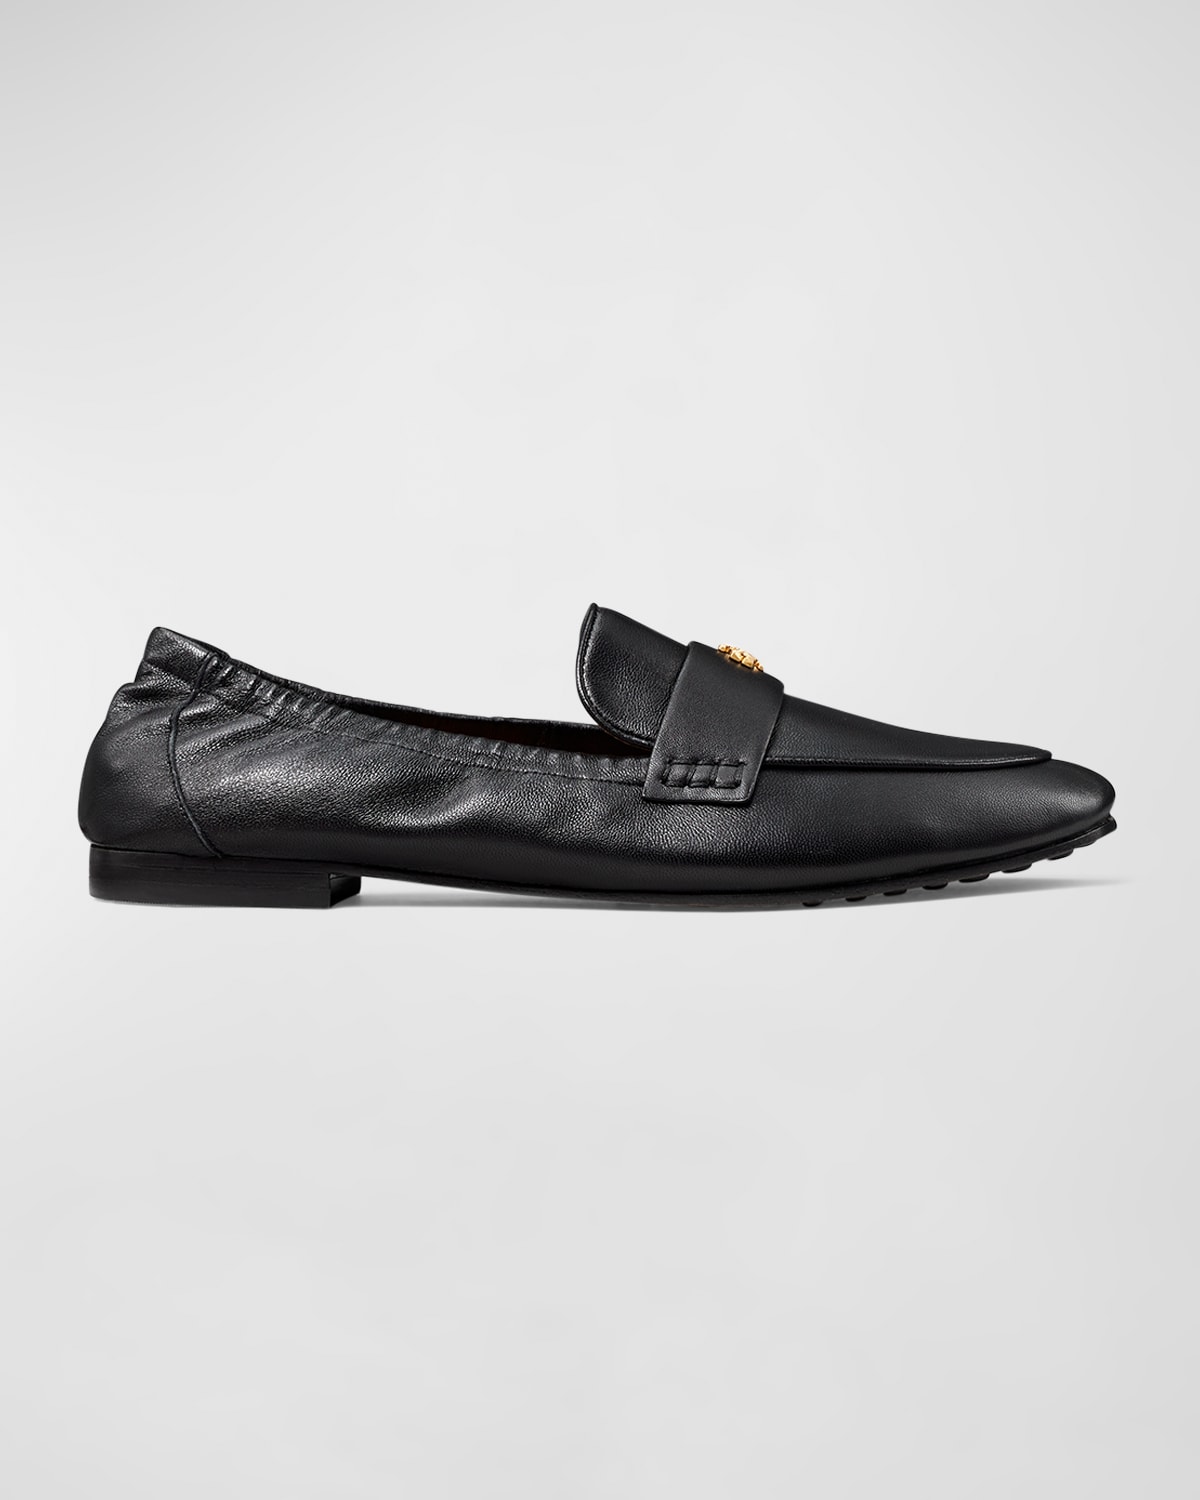 Tory Burch Bicolor Medallion Ballet Loafers | Neiman Marcus